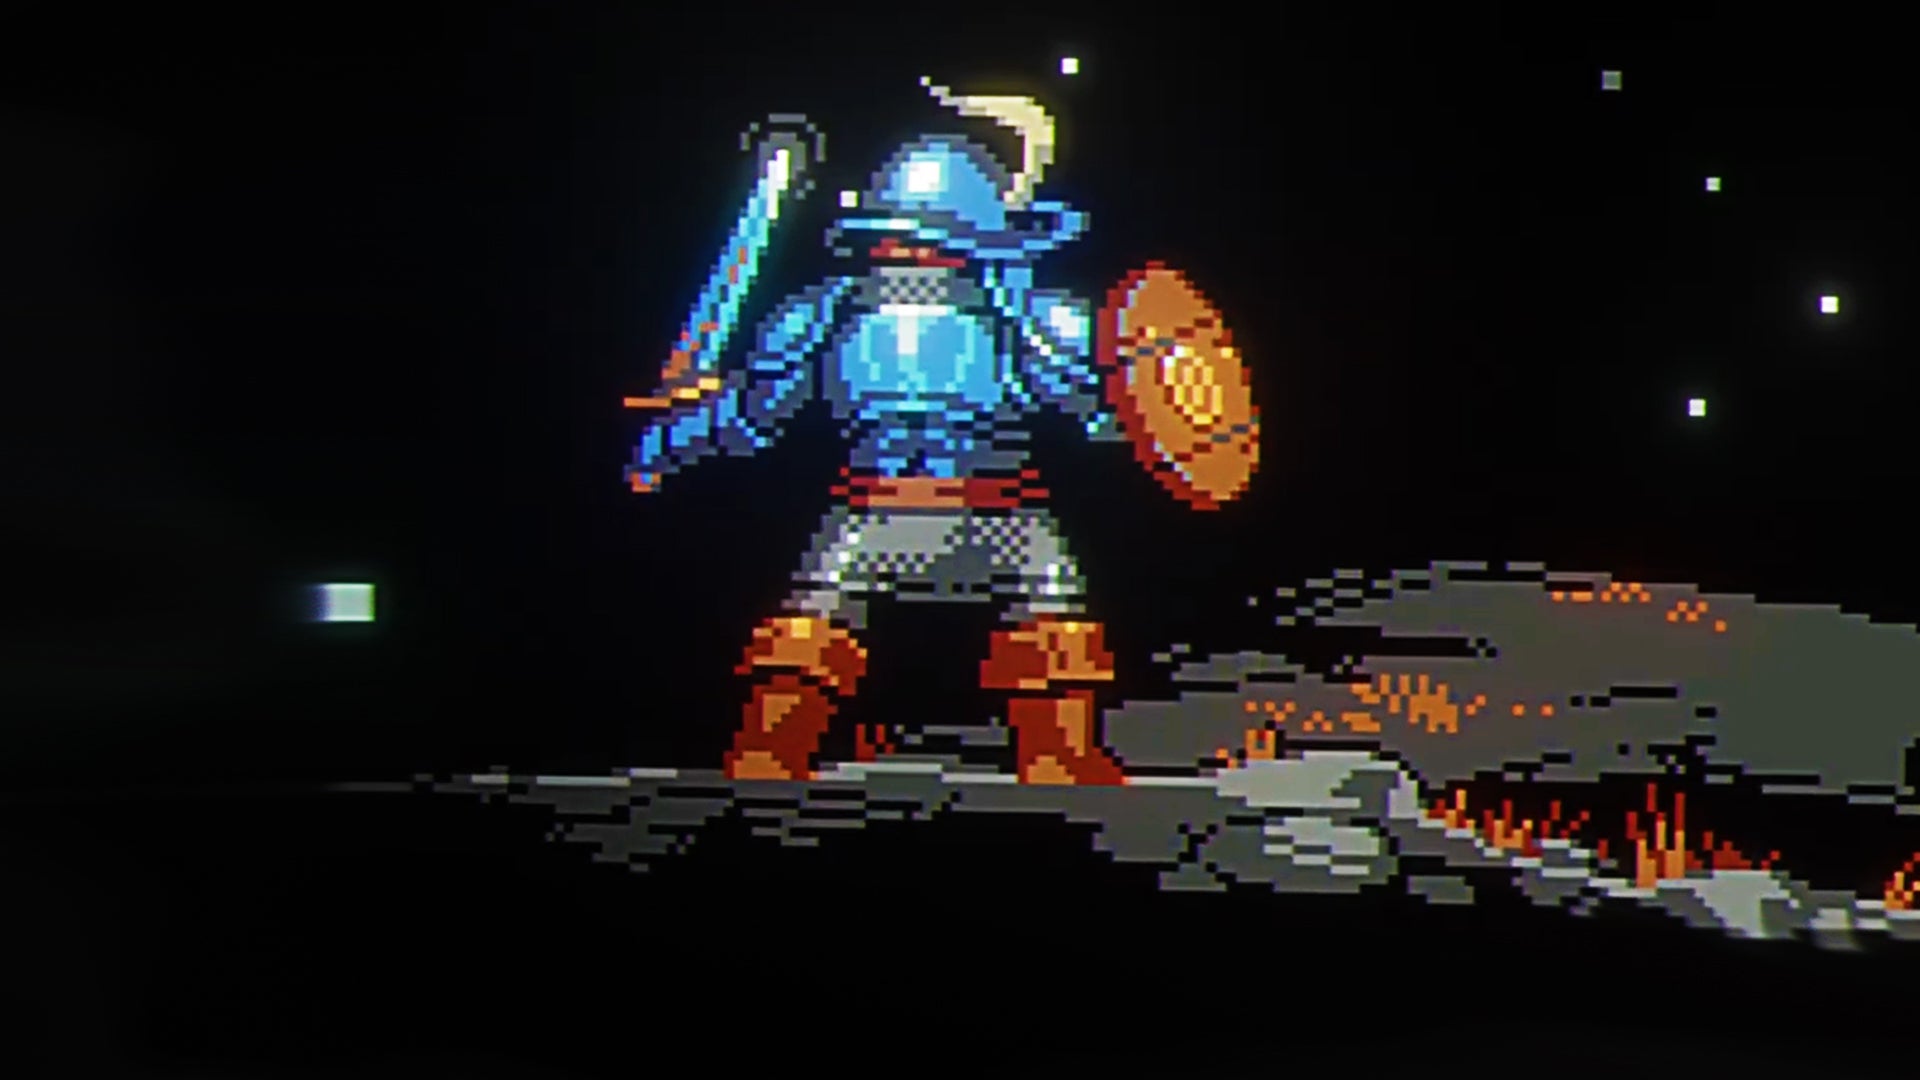 The adventurer from Loop Hero stood with their back to the camera, wearing blue armour.